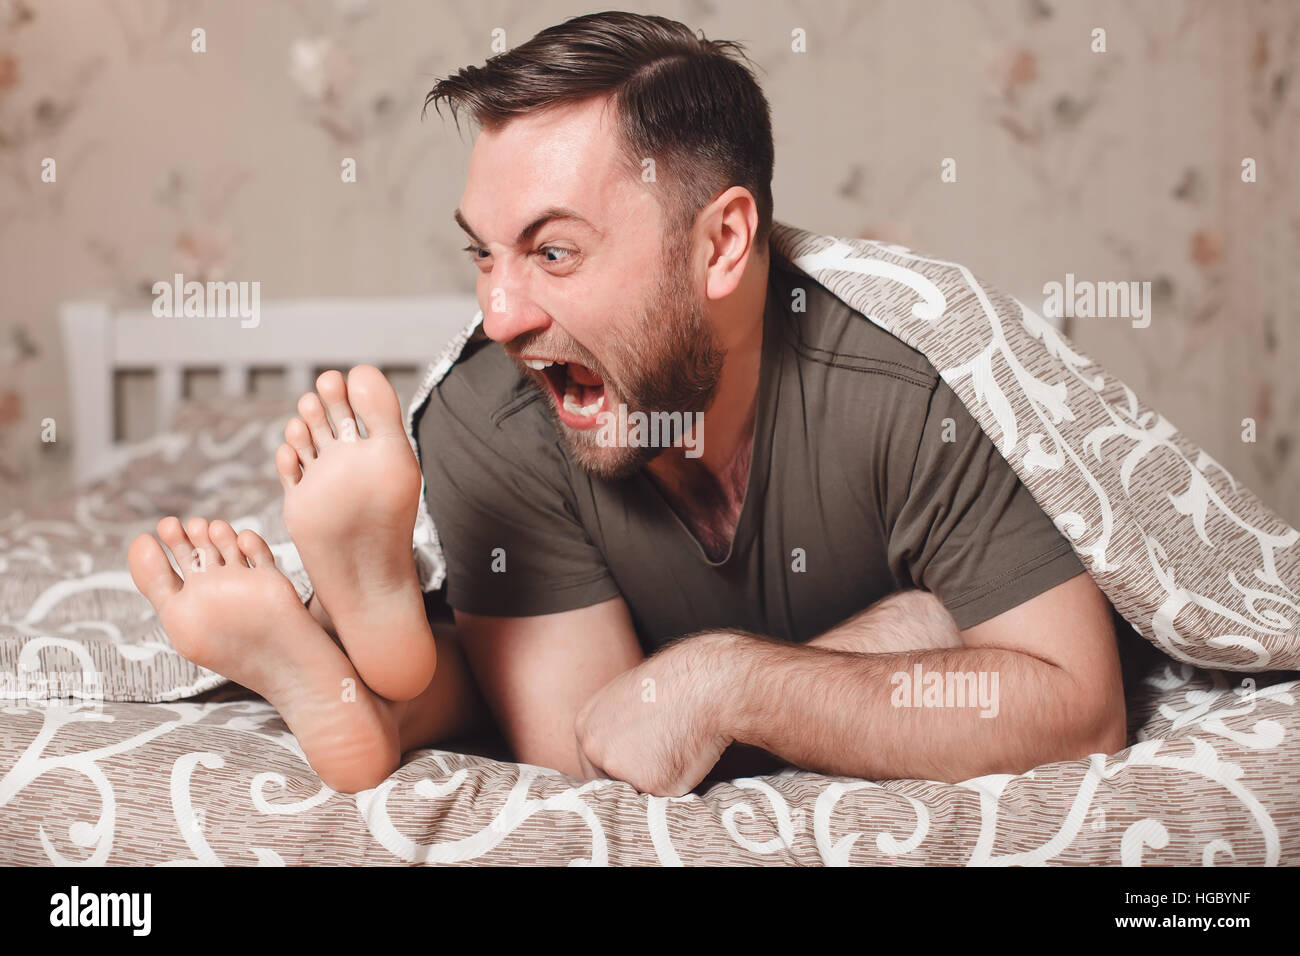 Man trying to bite woman's feet in bed. Stock Photo